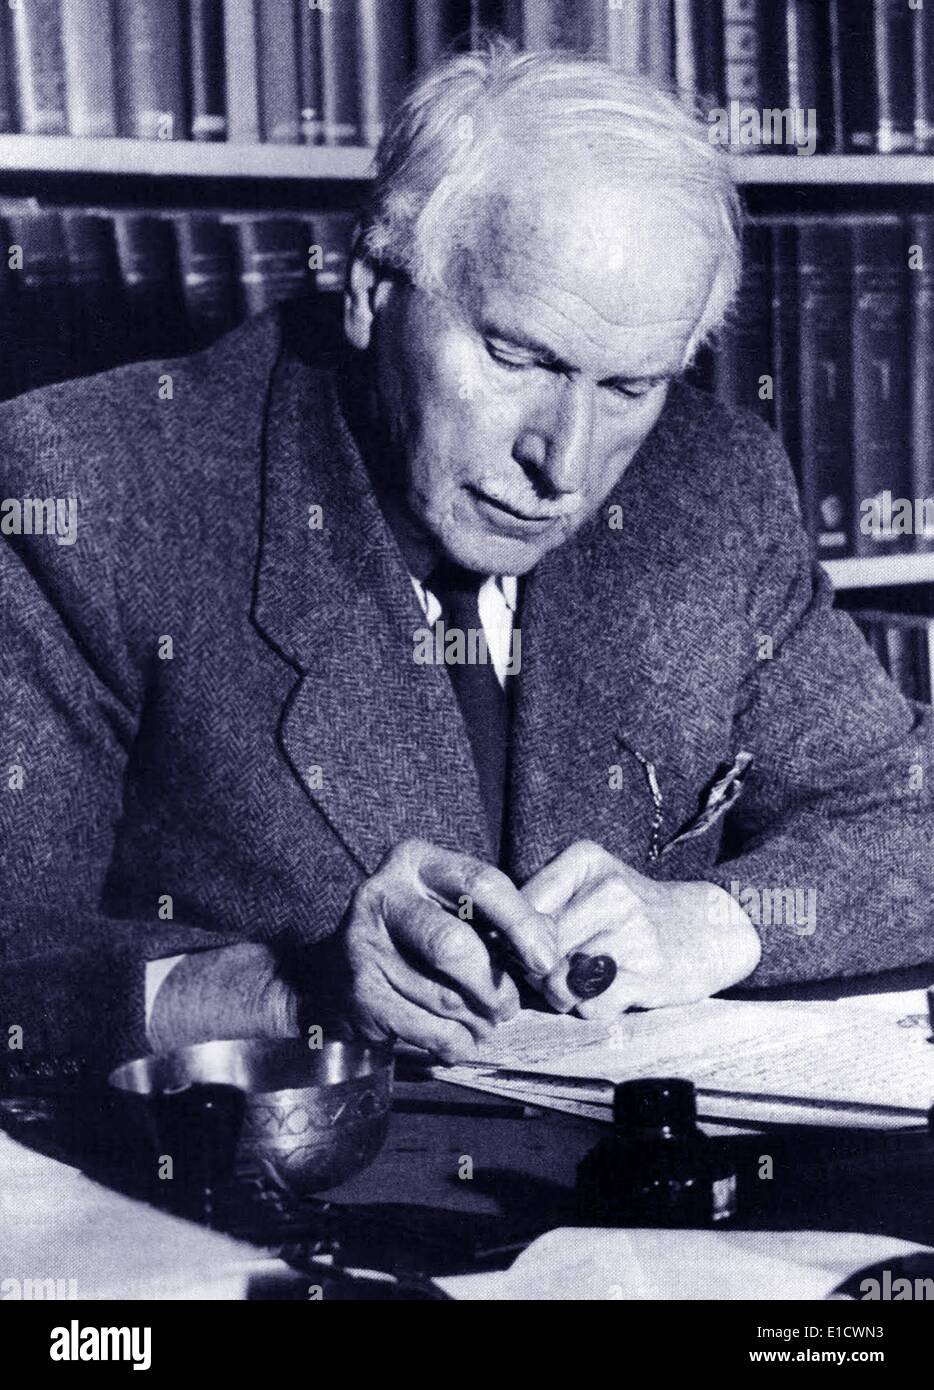 Carl G. Jung (26 July 1875 – 6 June 1961), was a Swiss psychiatrist and psychotherapist who was most famous for founding analytical psychology. Stock Photo